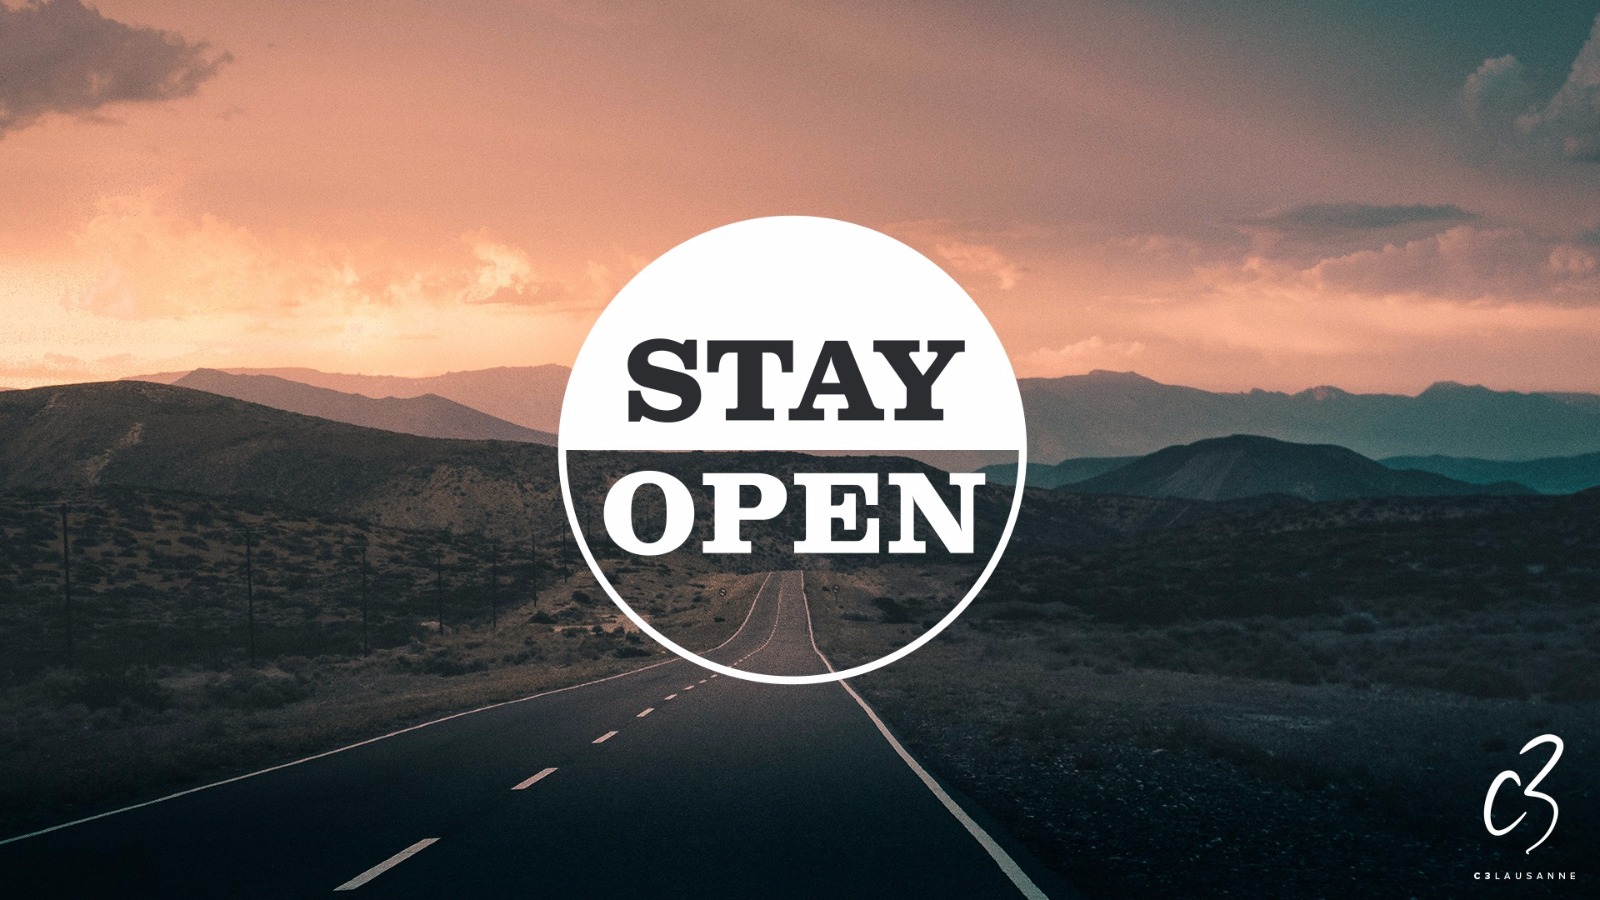 Stay open! Par Thierry Moehr